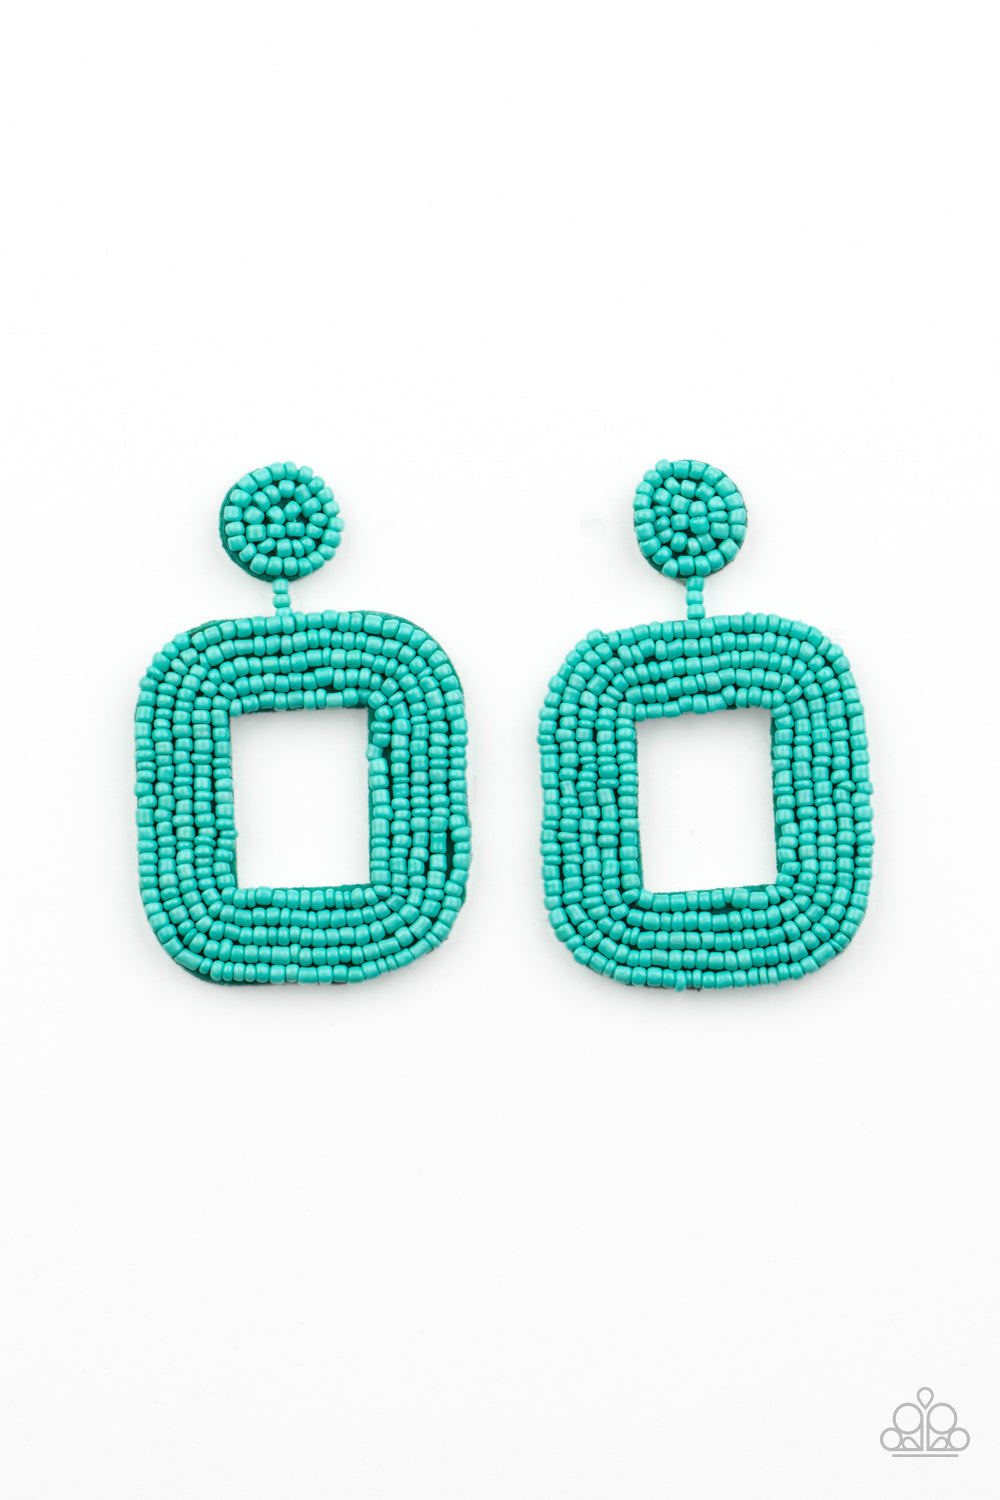 Paparazzi Accessories Beaded Bella - Blue Earrings - Lady T Accessories